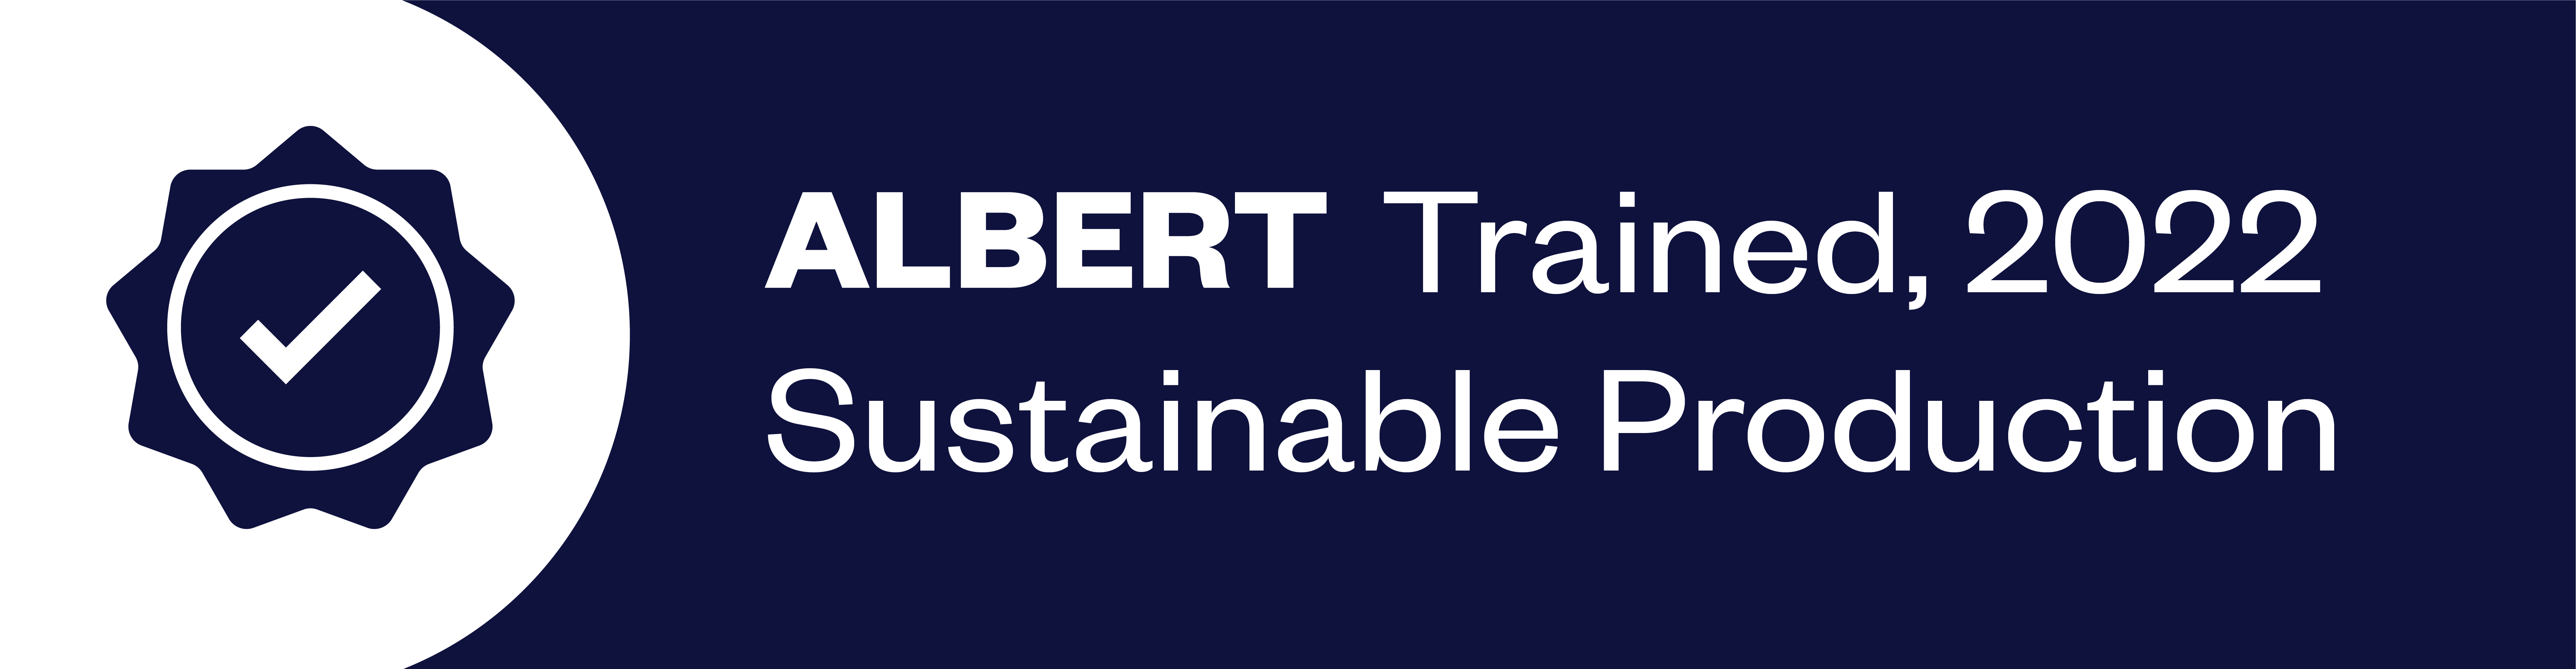 Albert trained 2022 sustainable production